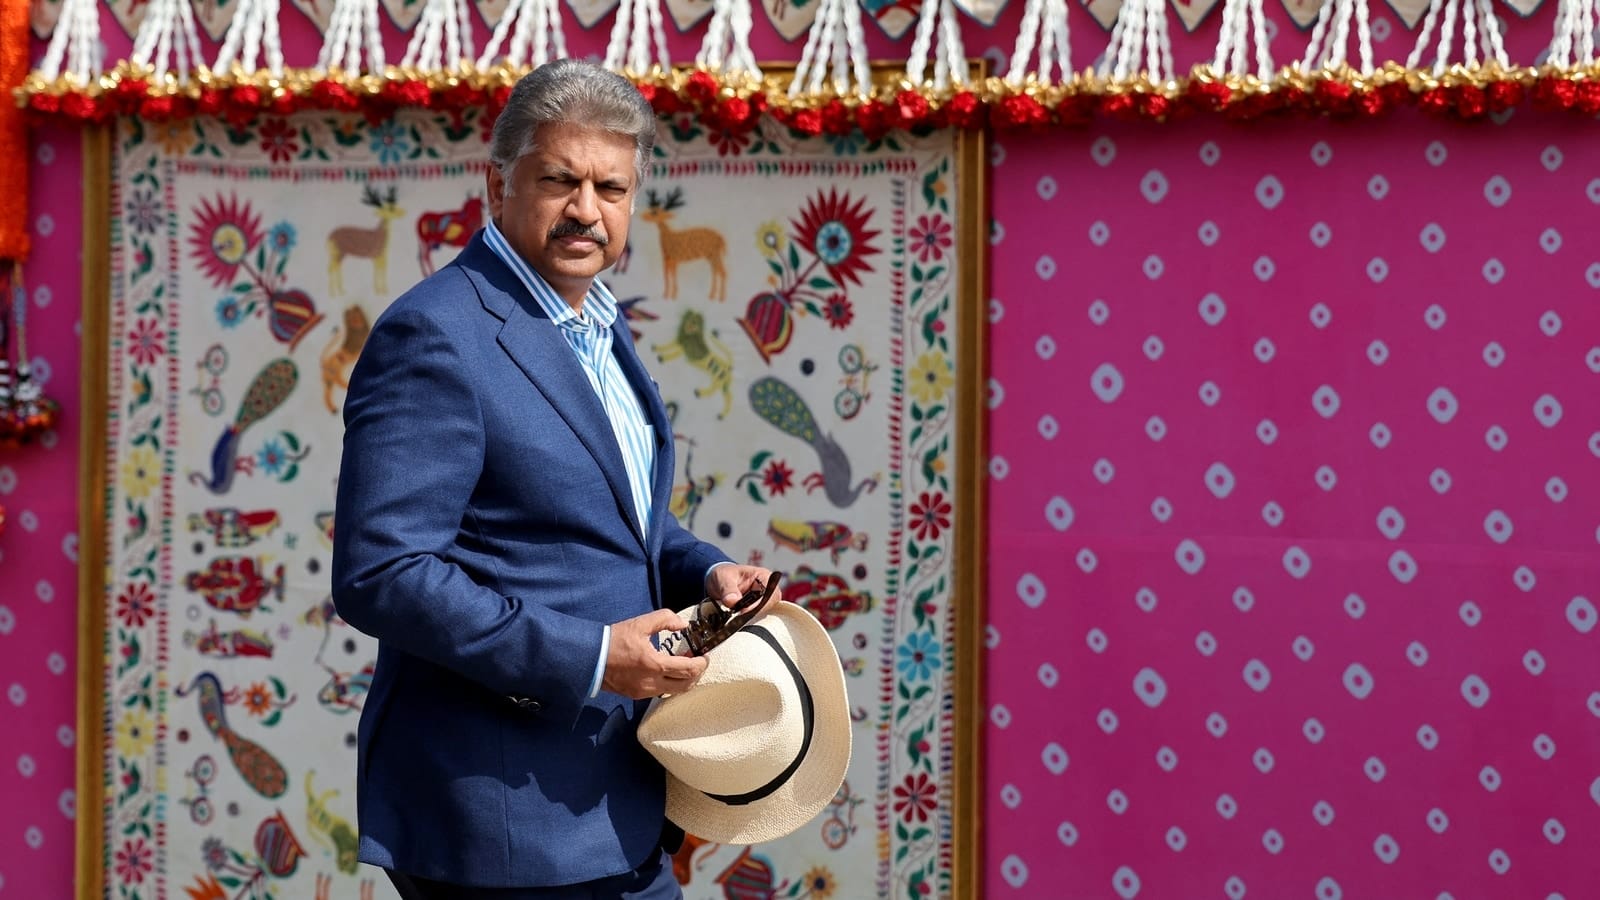 Anand Mahindra replies to X user who asked him if he could speak Tamil: ‘Unfortunately most of the…’